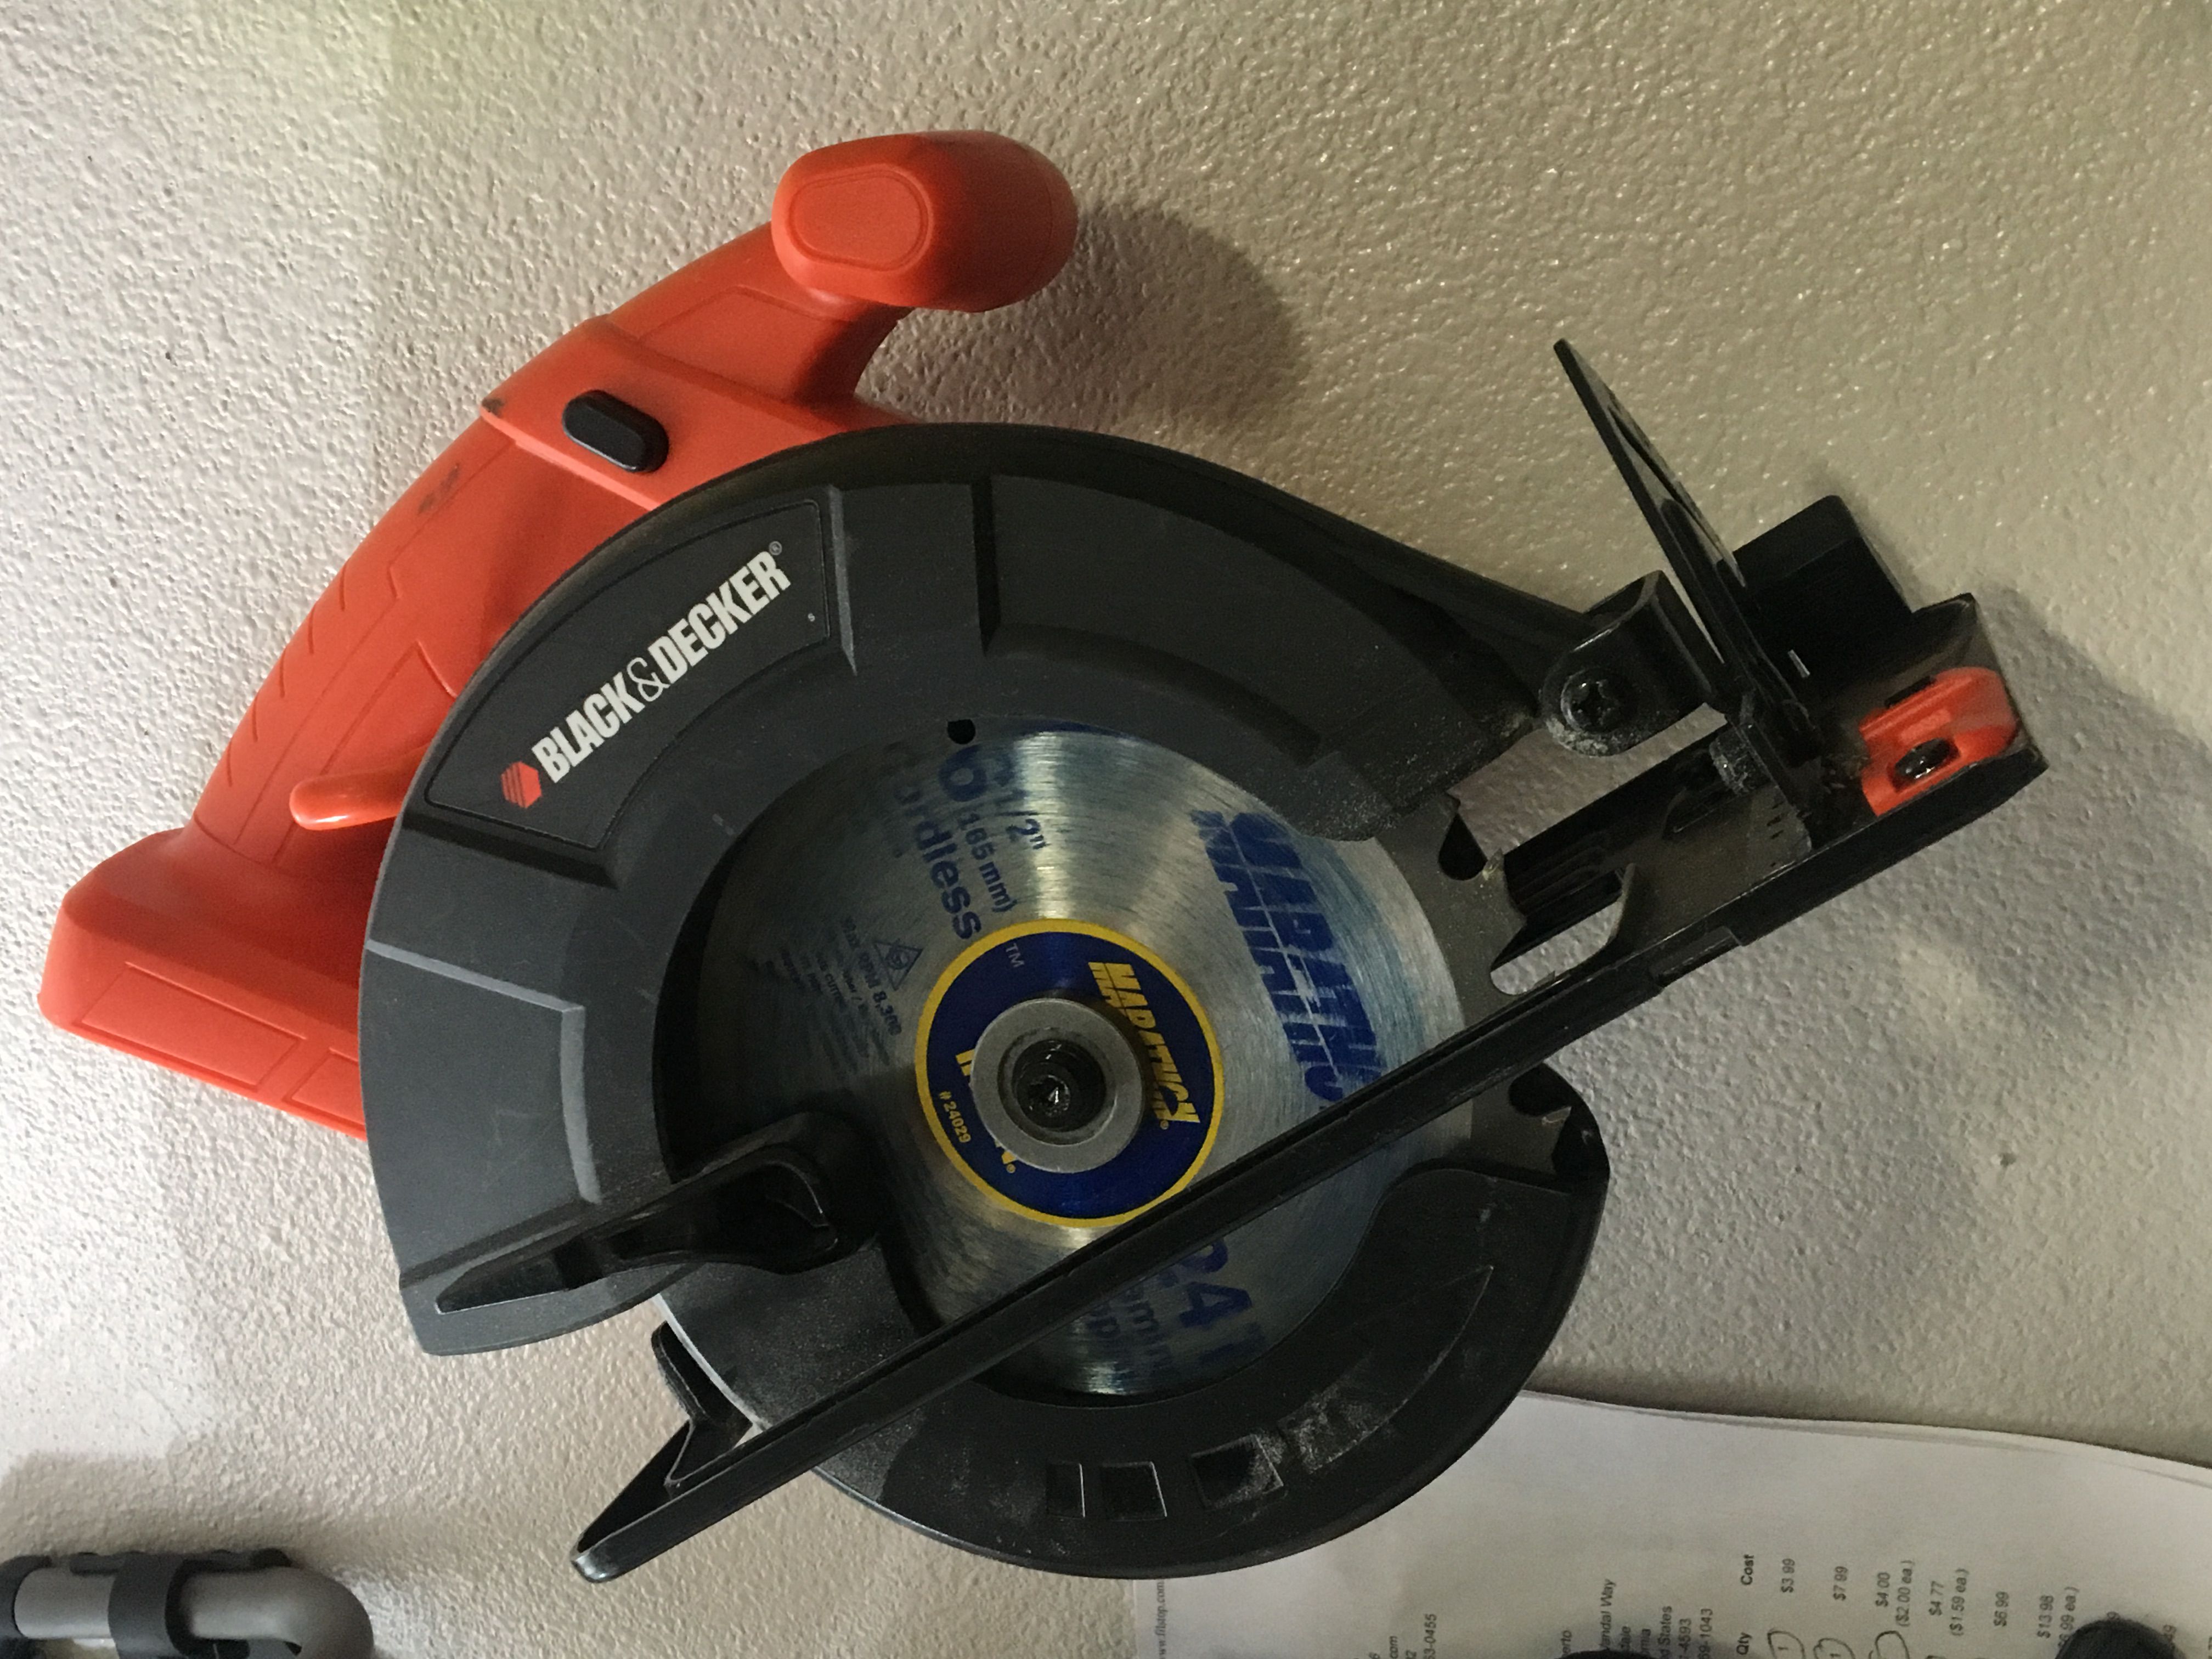 Black & Decker Firestorm BDCS1806 18v Cordless Circular Saw BARE TOOL ONLY  for Sale in Palmdale, CA - OfferUp